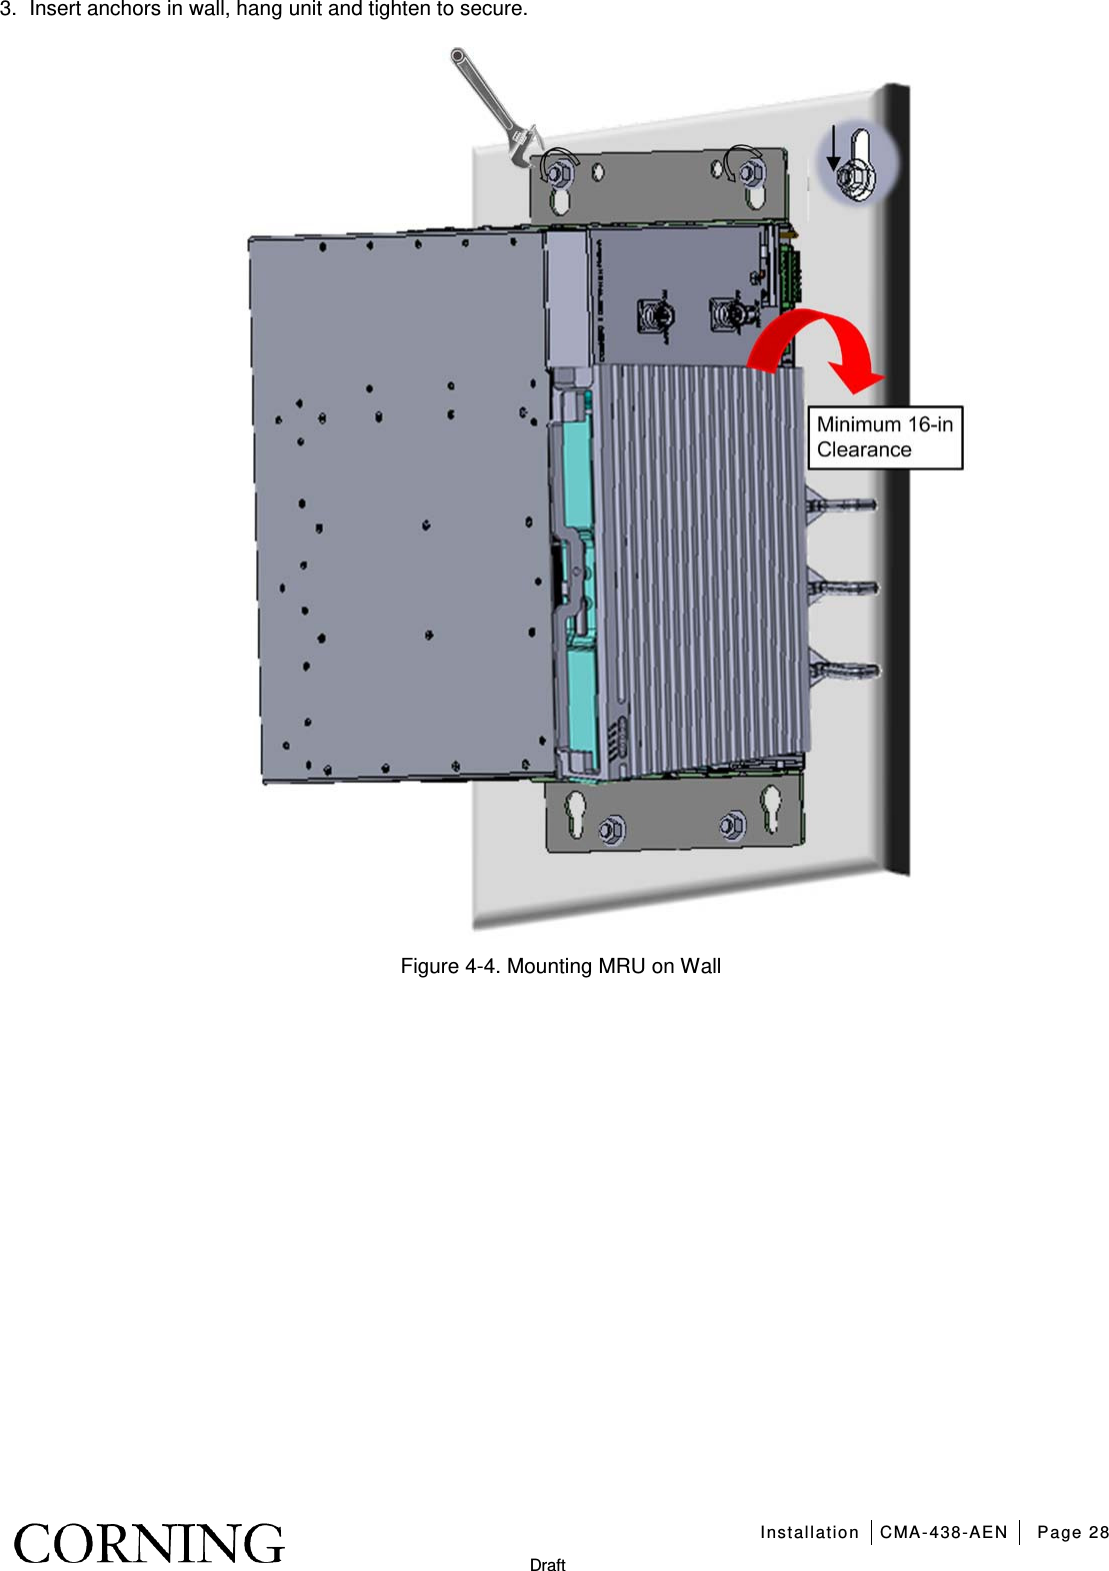   Installation CMA-438-AEN Page 28   Draft 3.  Insert anchors in wall, hang unit and tighten to secure.  Figure  4-4. Mounting MRU on Wall   